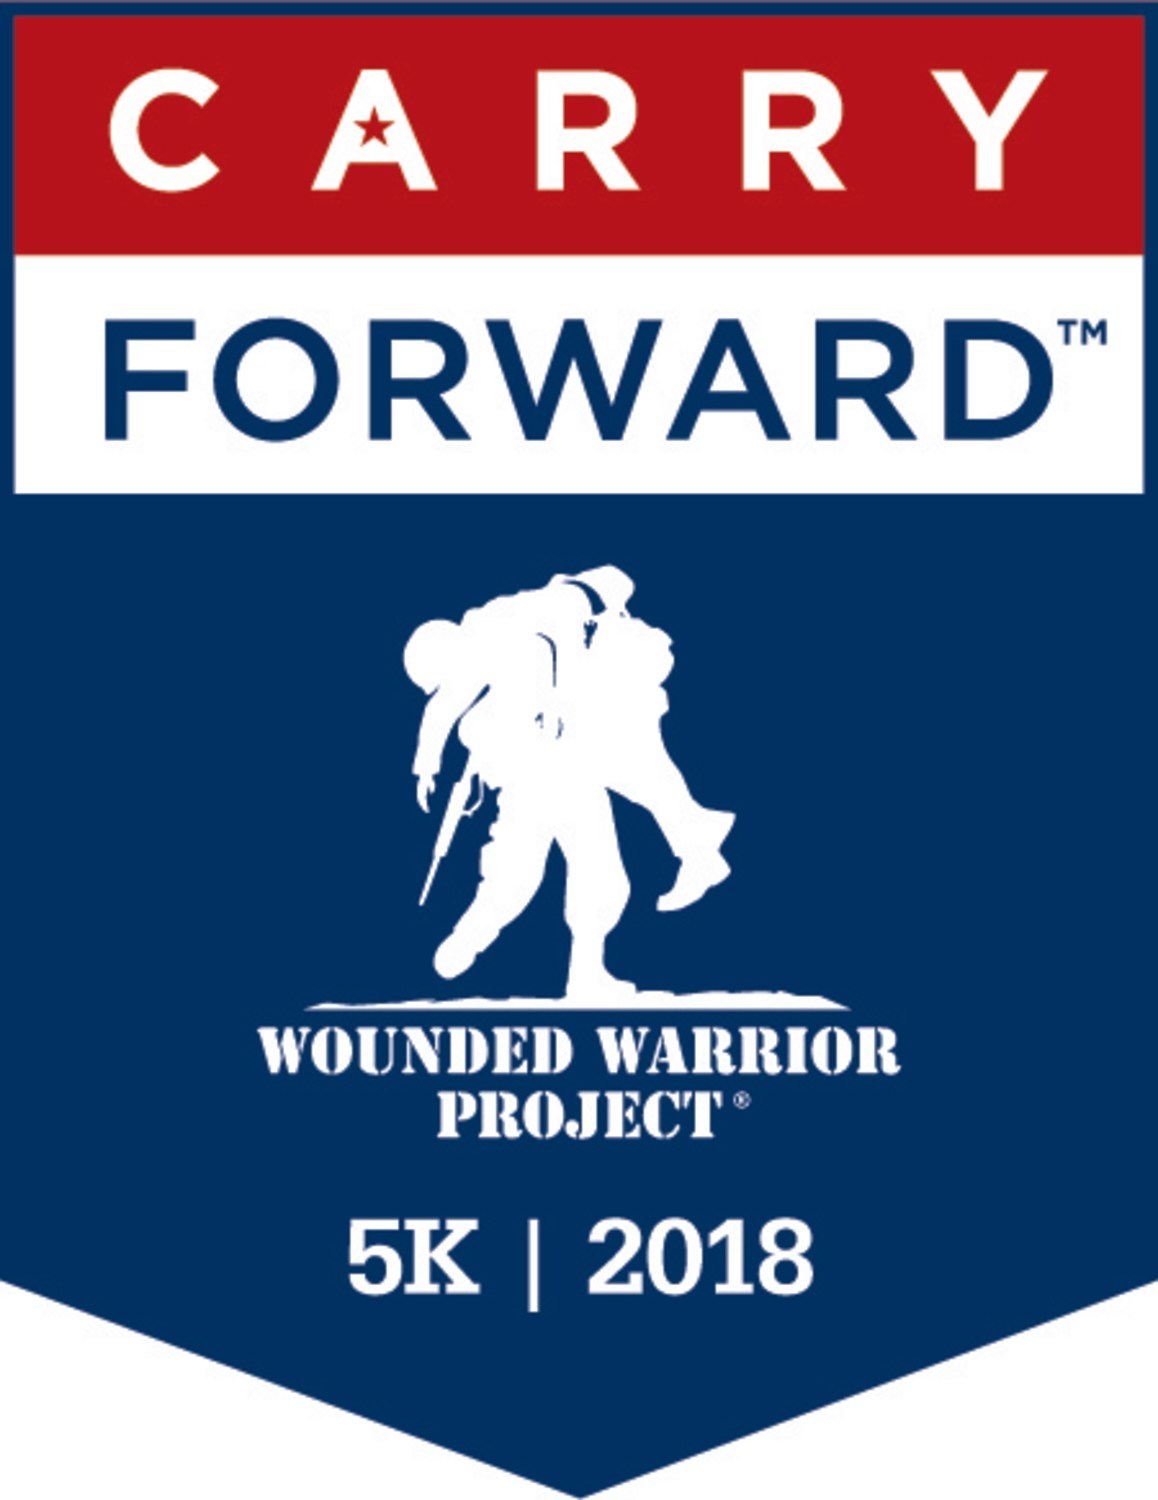 Wounded Warrior Project Launches 5K Series to Empower Veterans WWP